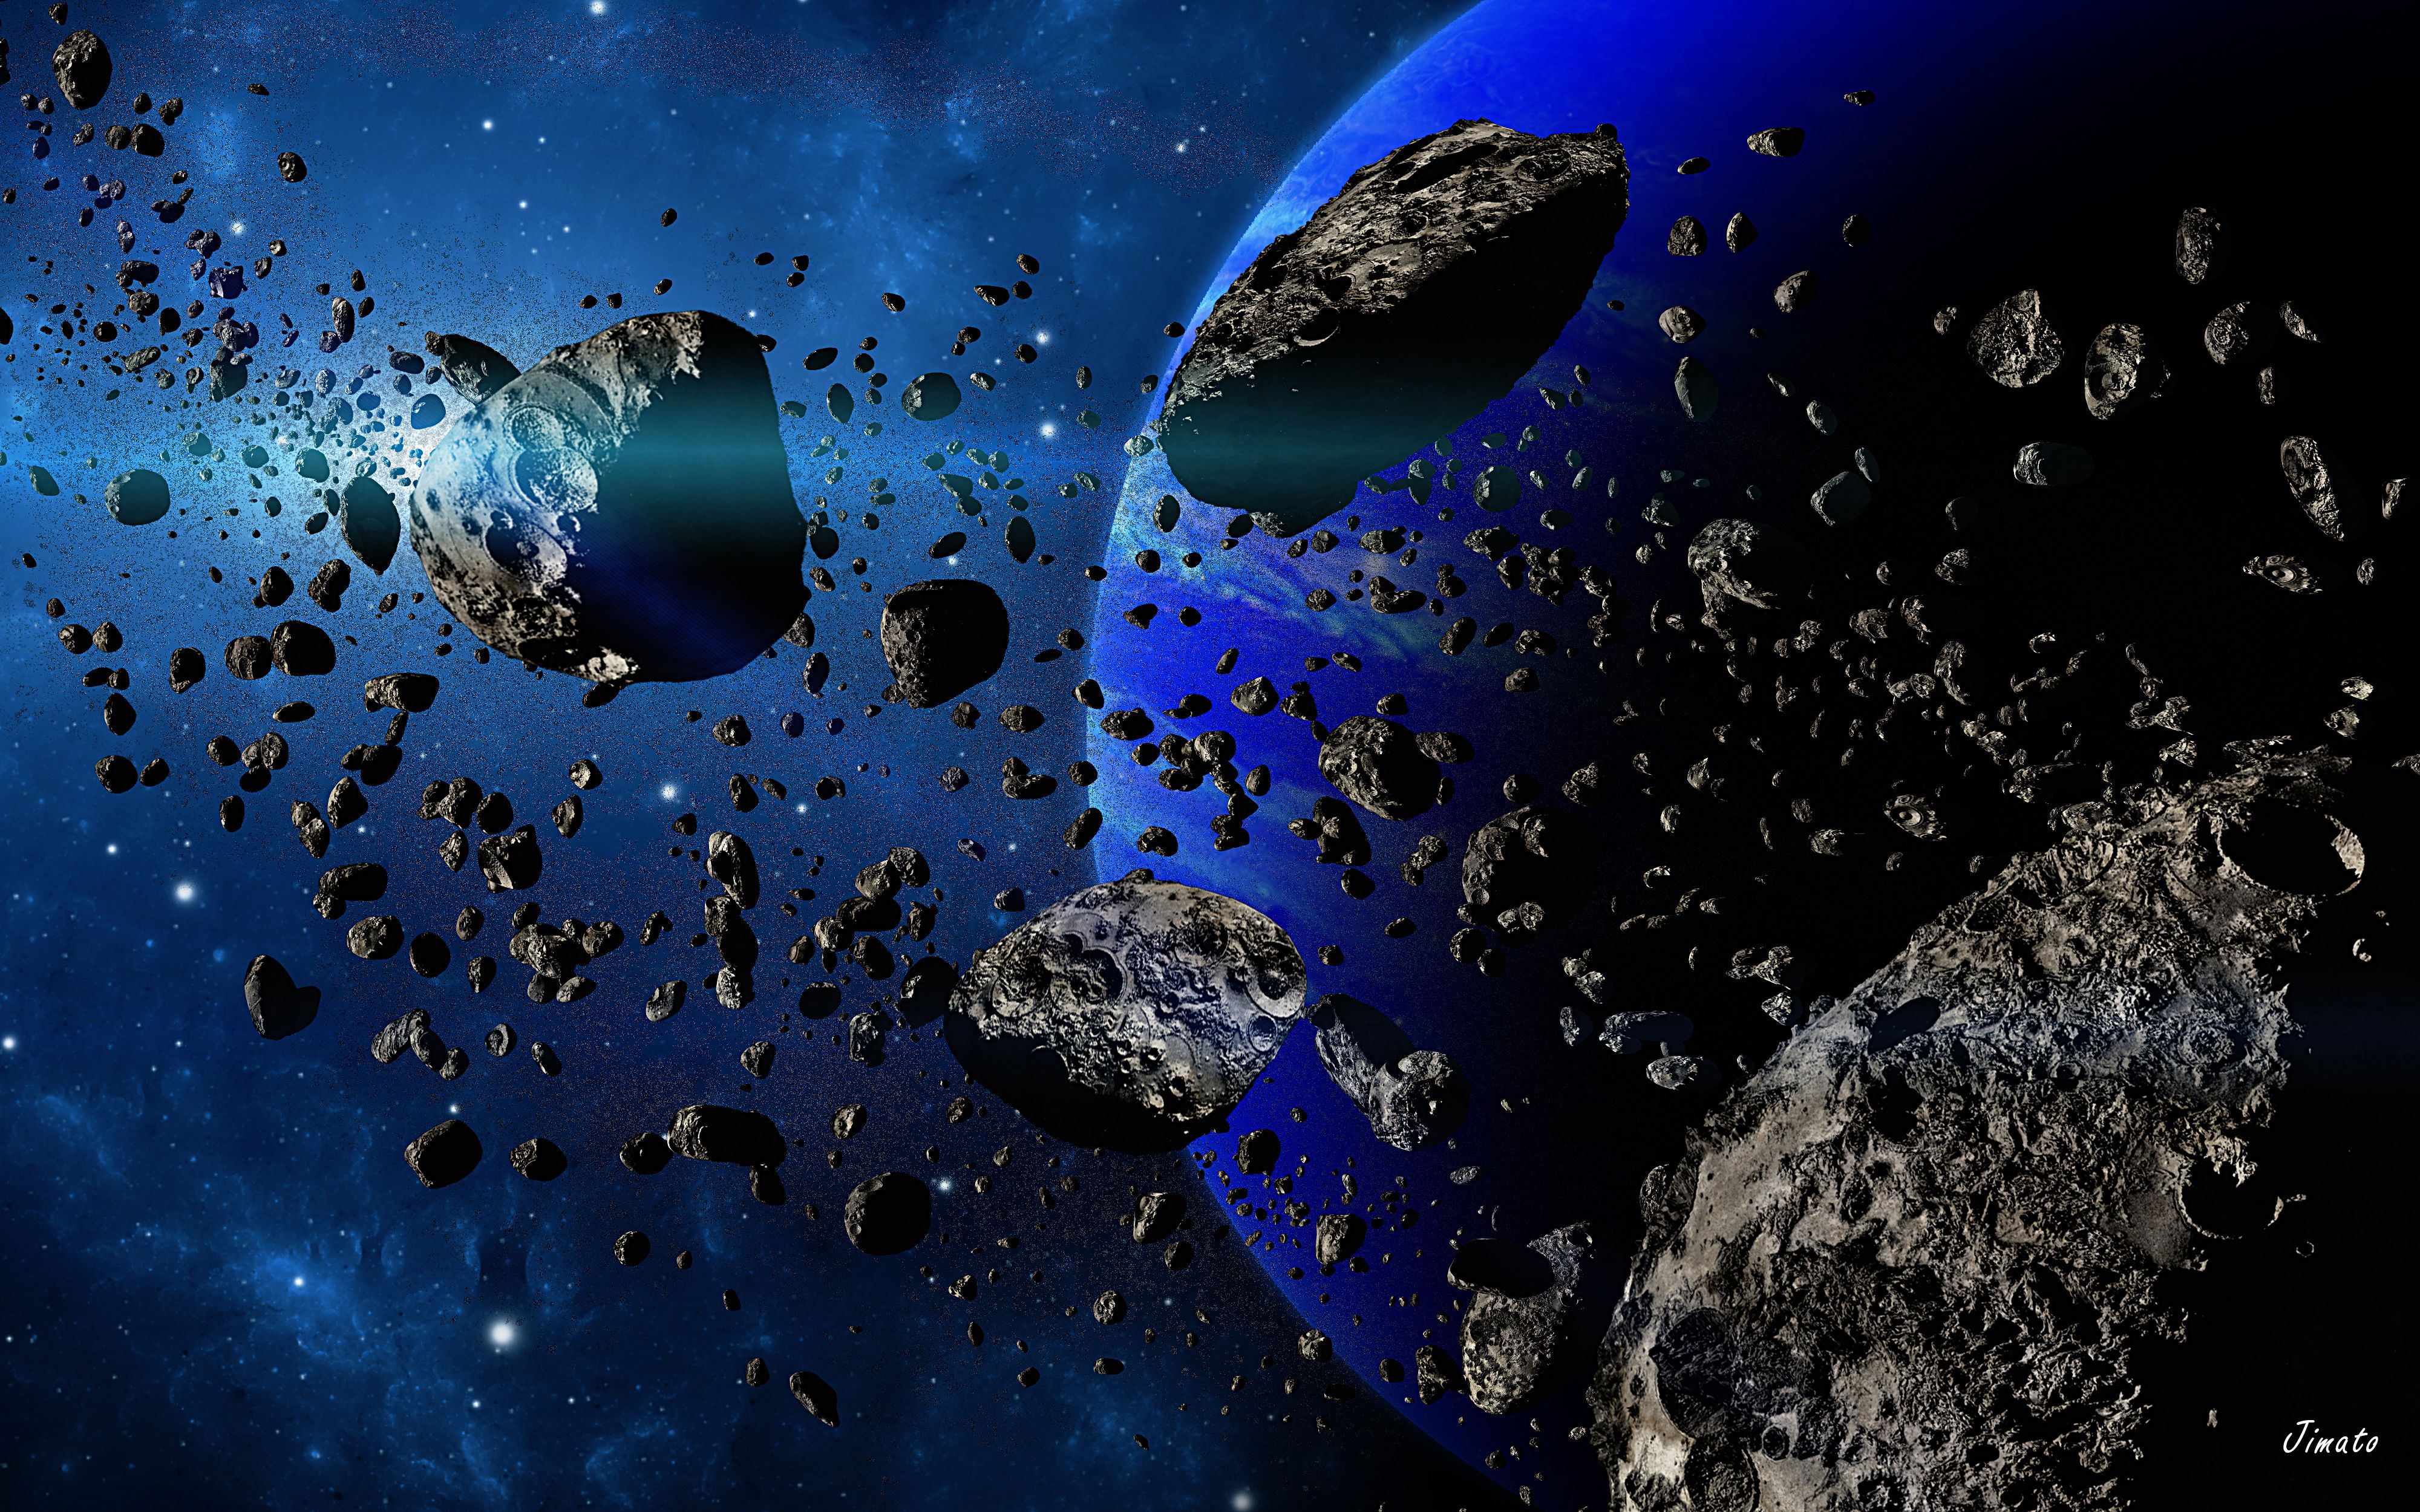 Best Space Wallpaper: Asteroids, Space